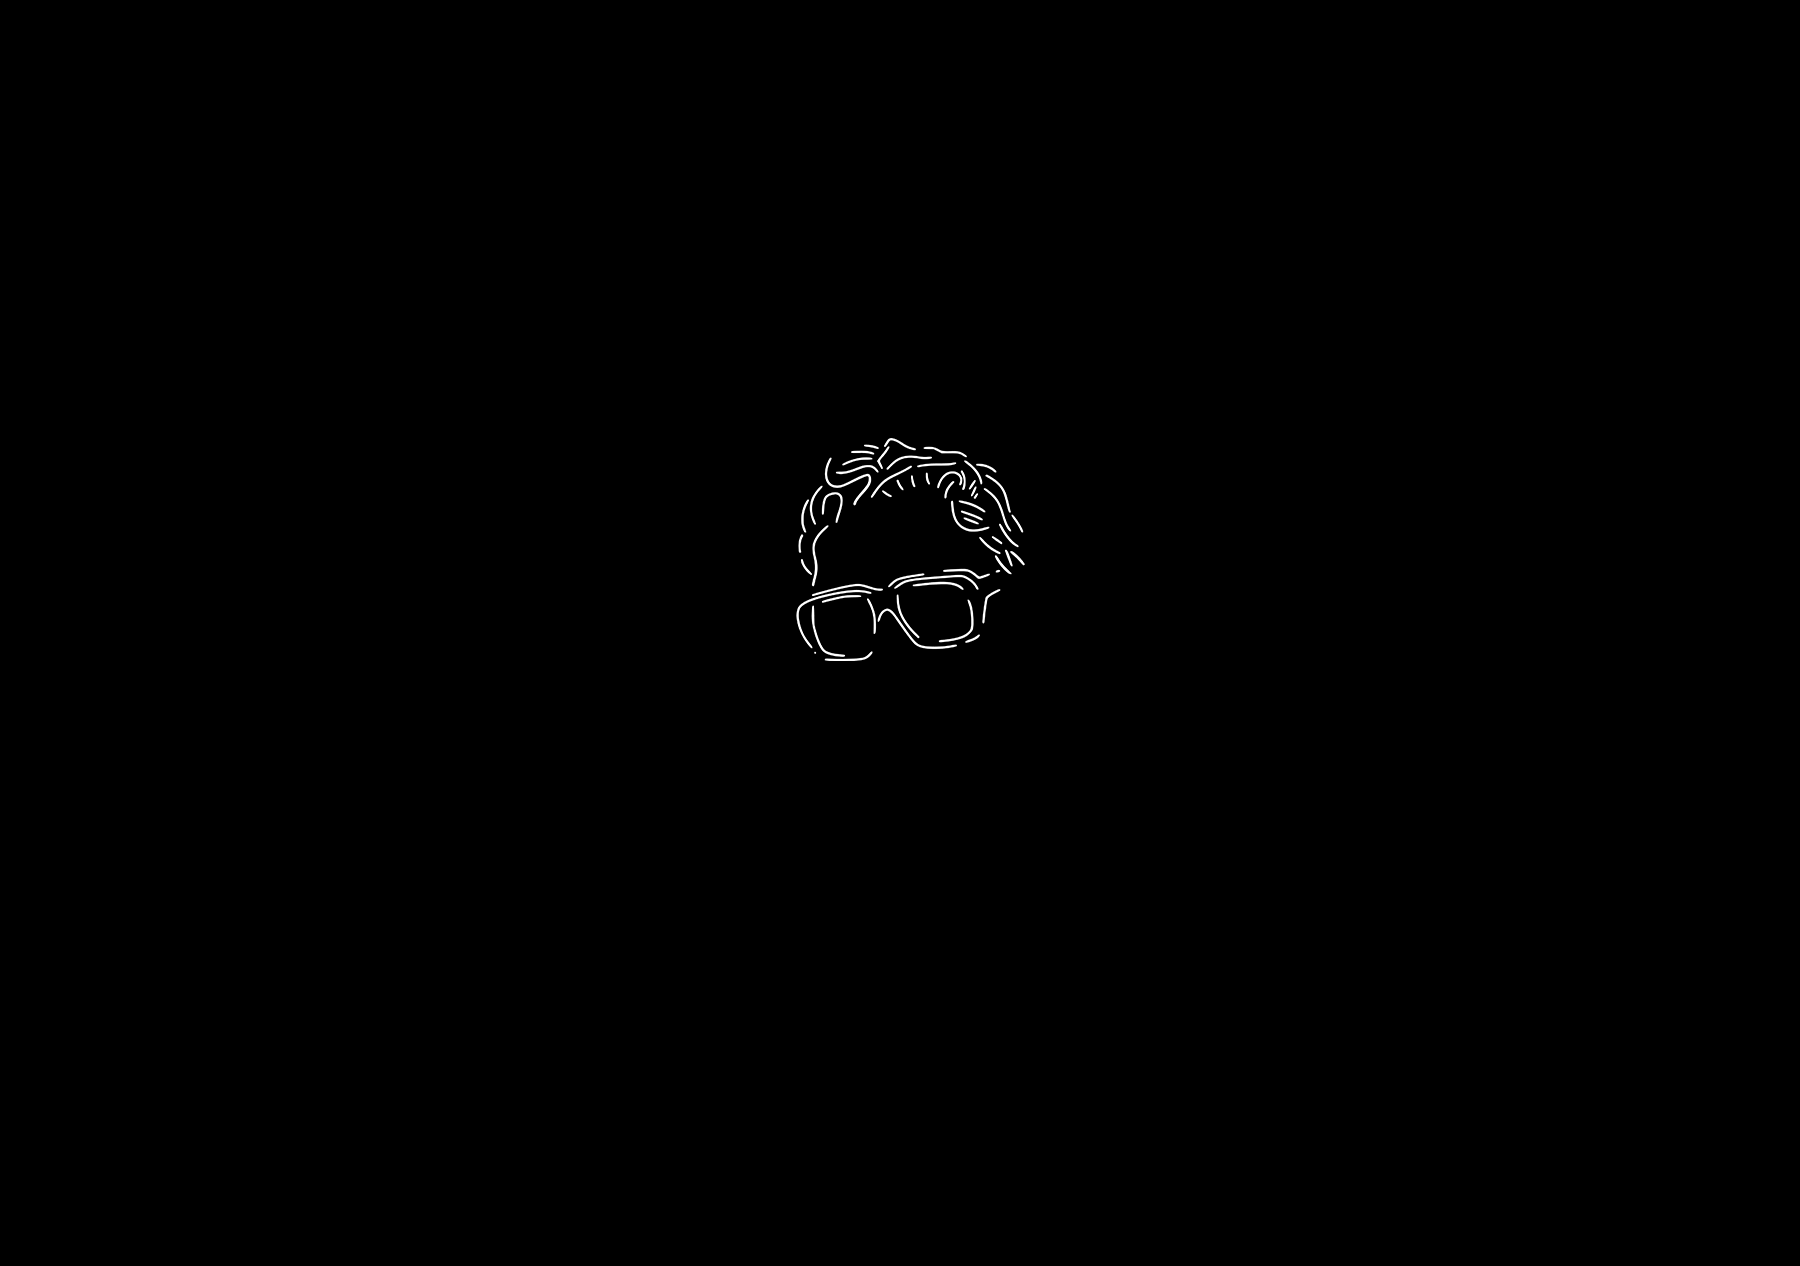 Harry Hamilton Foundation animated logo variations in white on a black background. The logo features a line illustration of the top of Harry's head down to his glasses, with the type below in serif typeface.